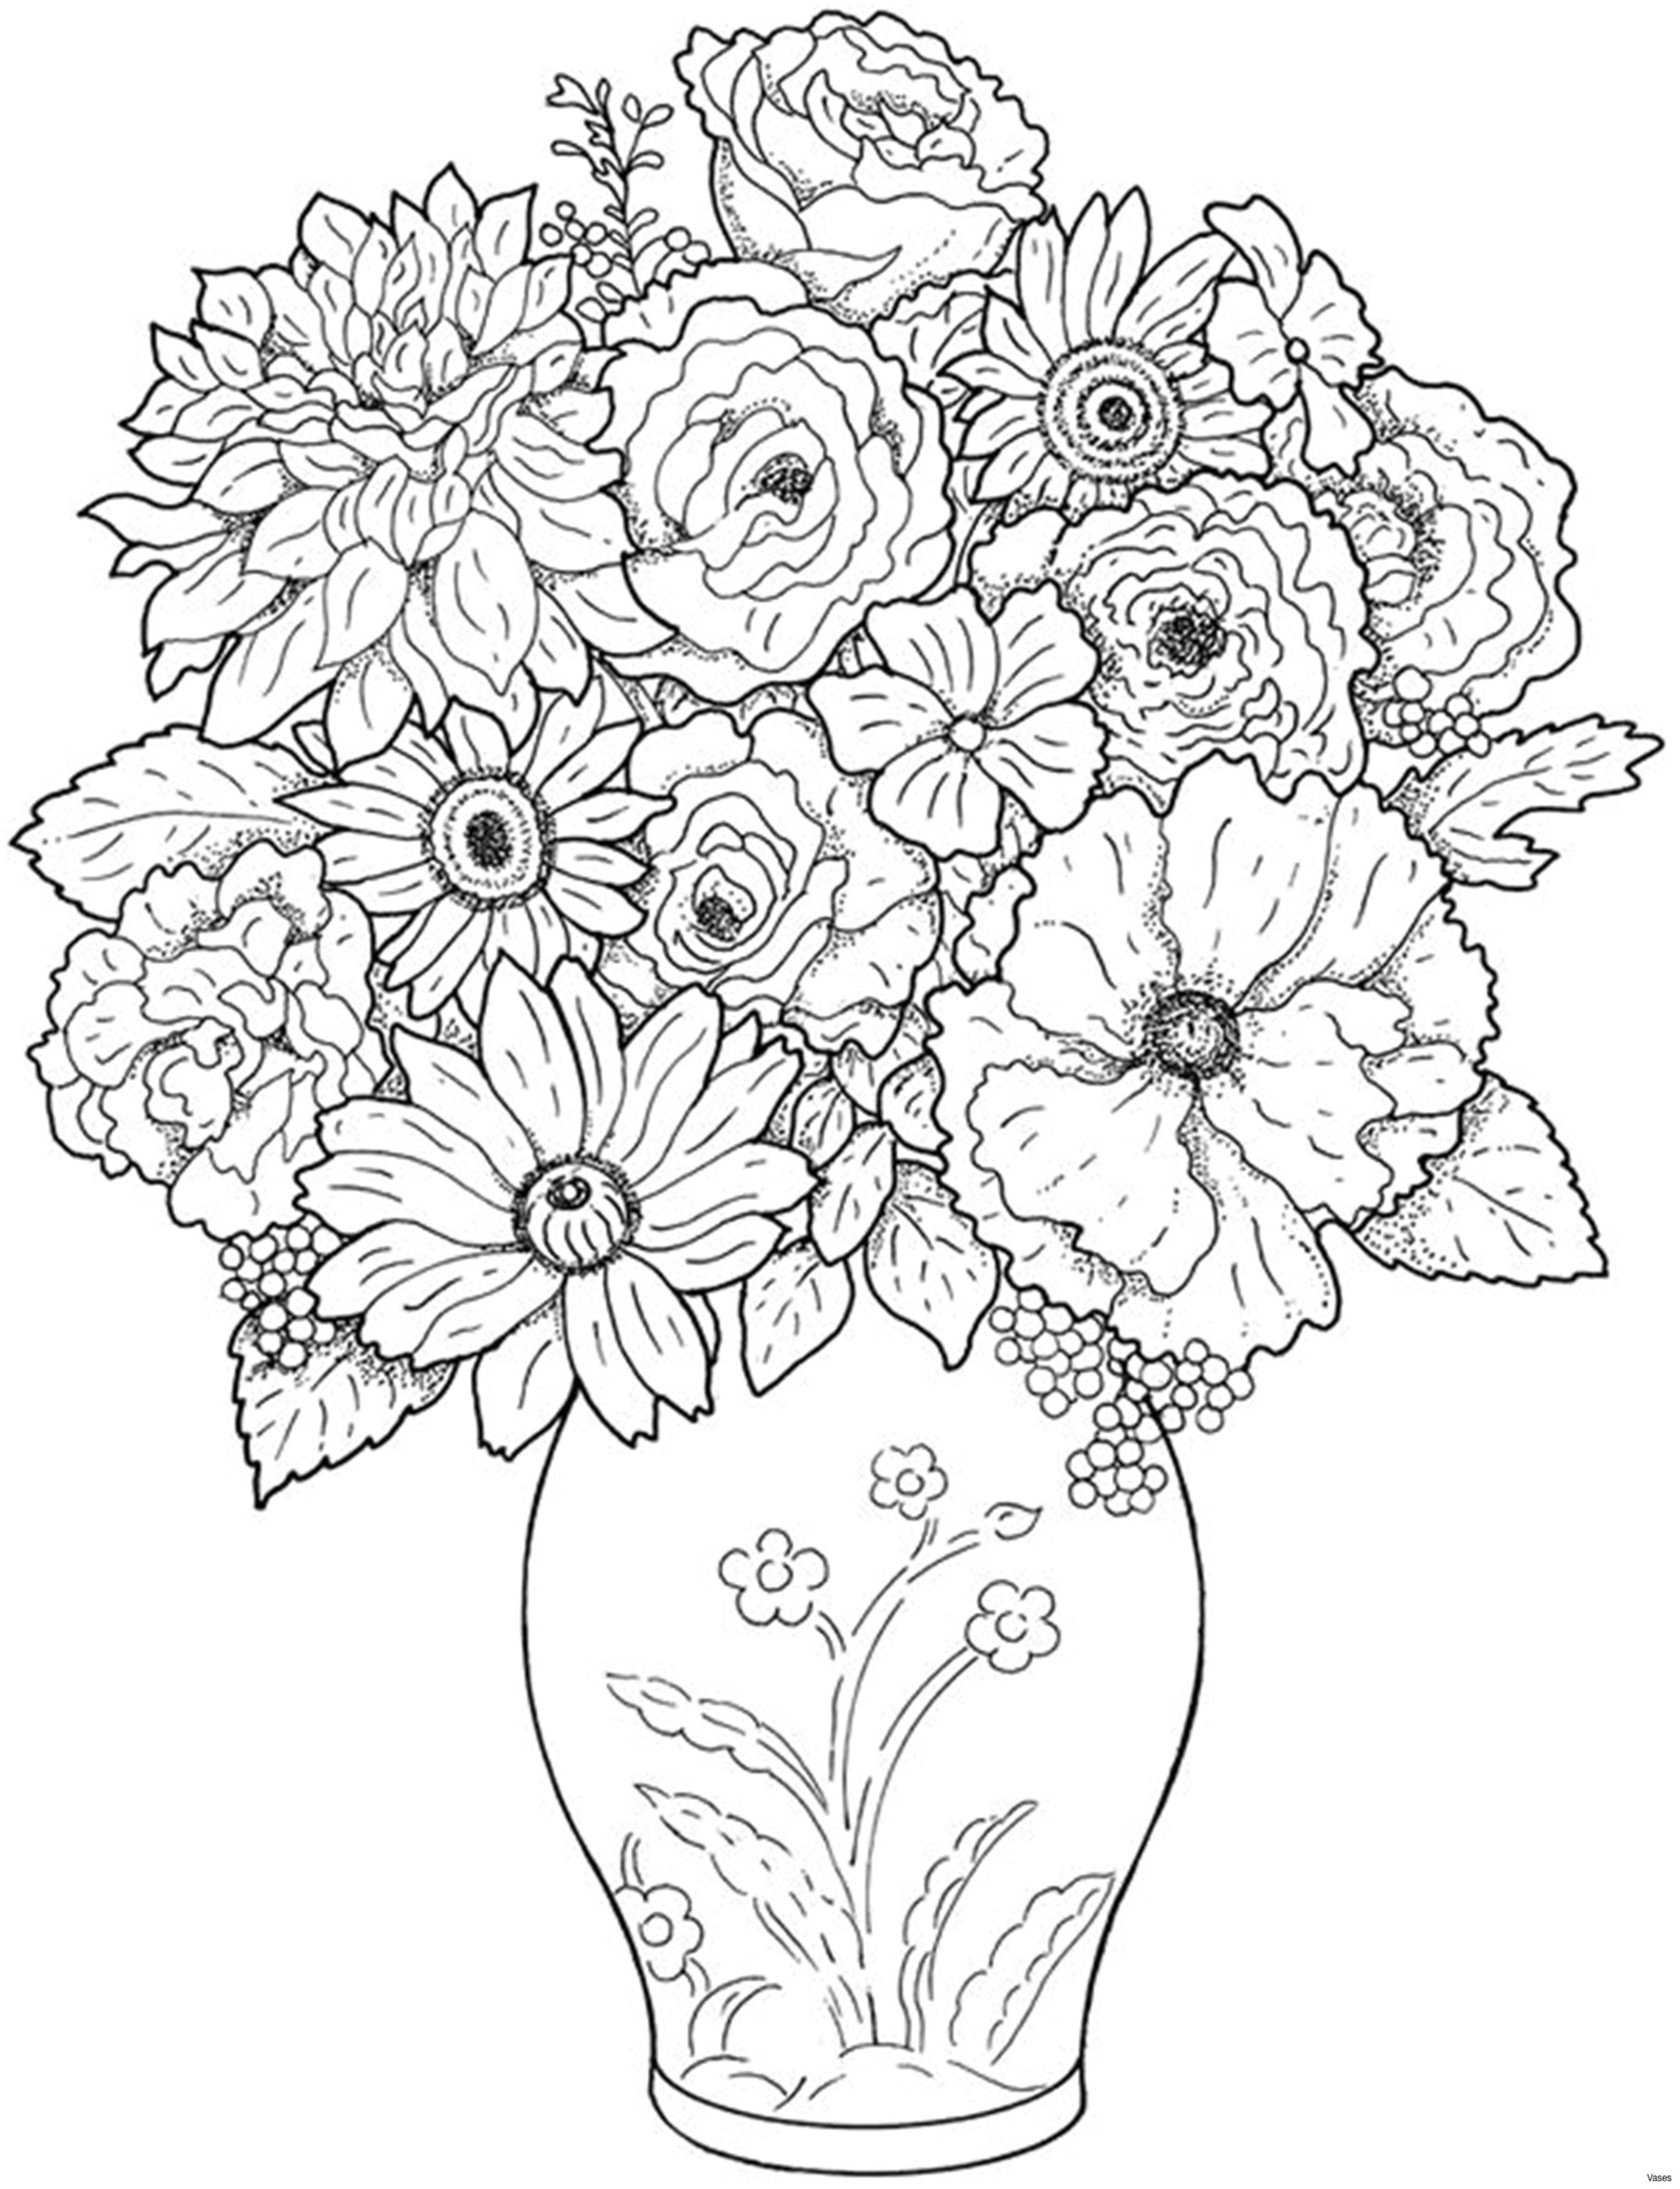 Drawings Of Flowers with Color Fresh Flowers to Color Creditoparataxi Com